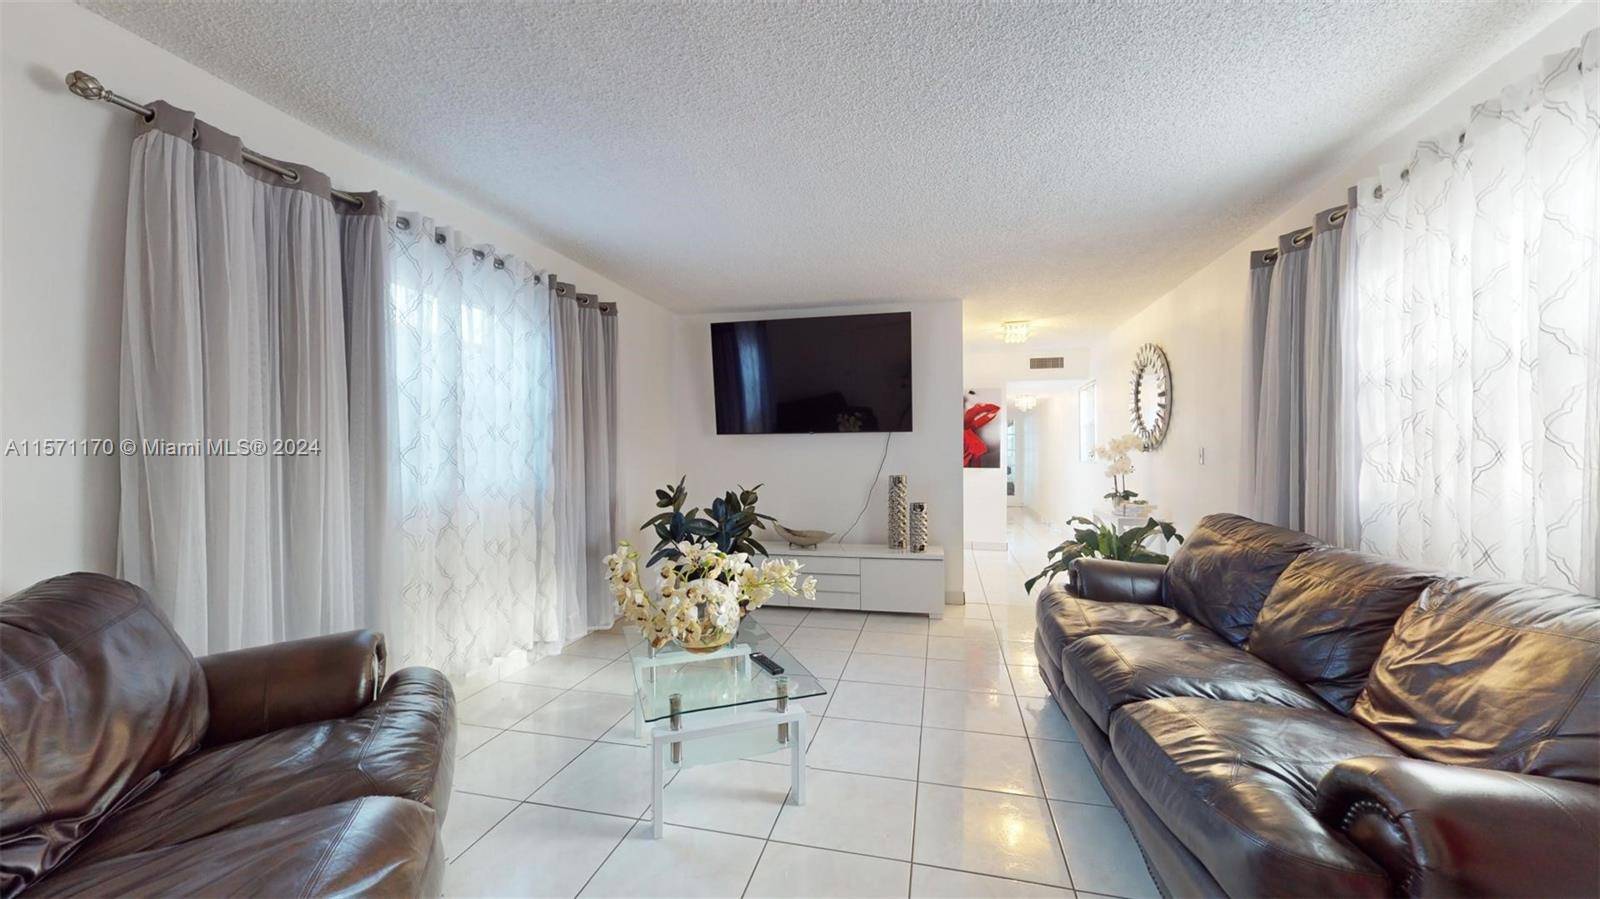 Welcome to this unique home in a desirable Hialeah neighborhood.